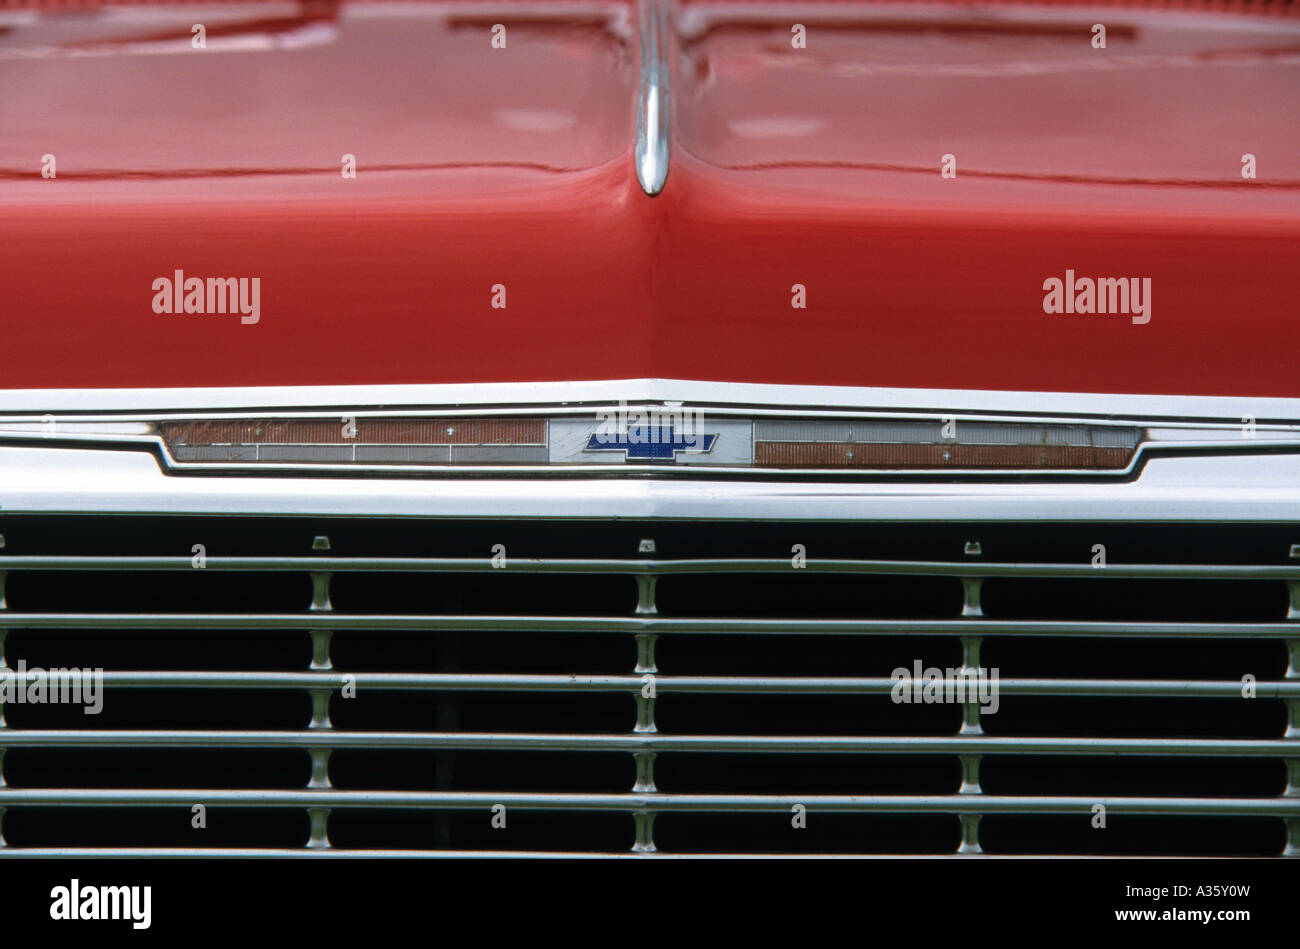 Chevrolet Impala of 1964. American car manufacturer 1911 to date Stock Photo